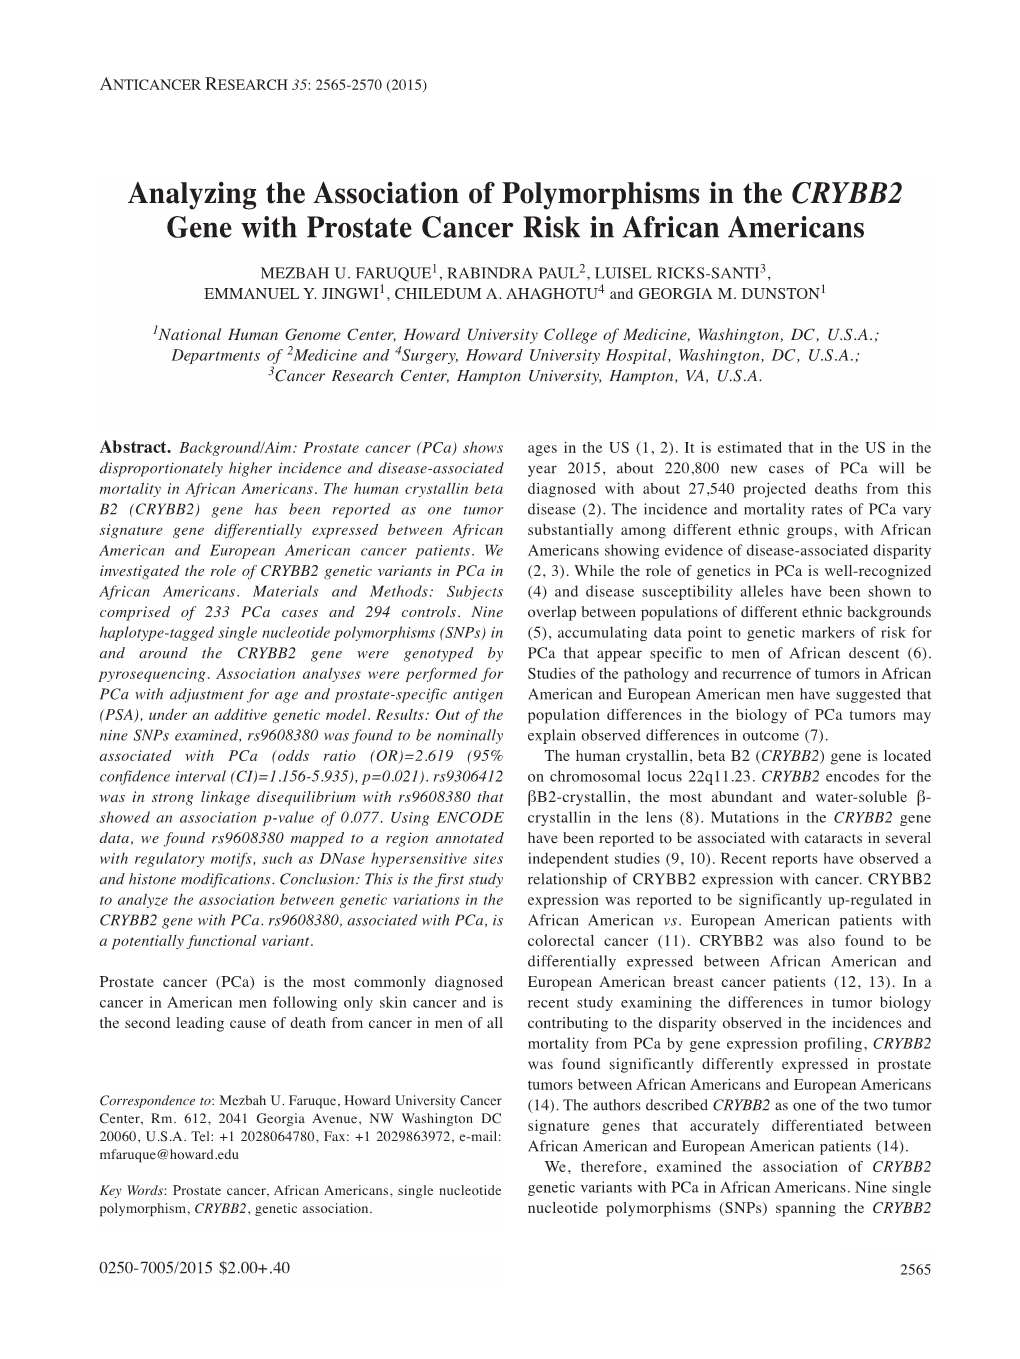 Analyzing the Association of Polymorphisms in the CRYBB2 Gene with Prostate Cancer Risk in African Americans